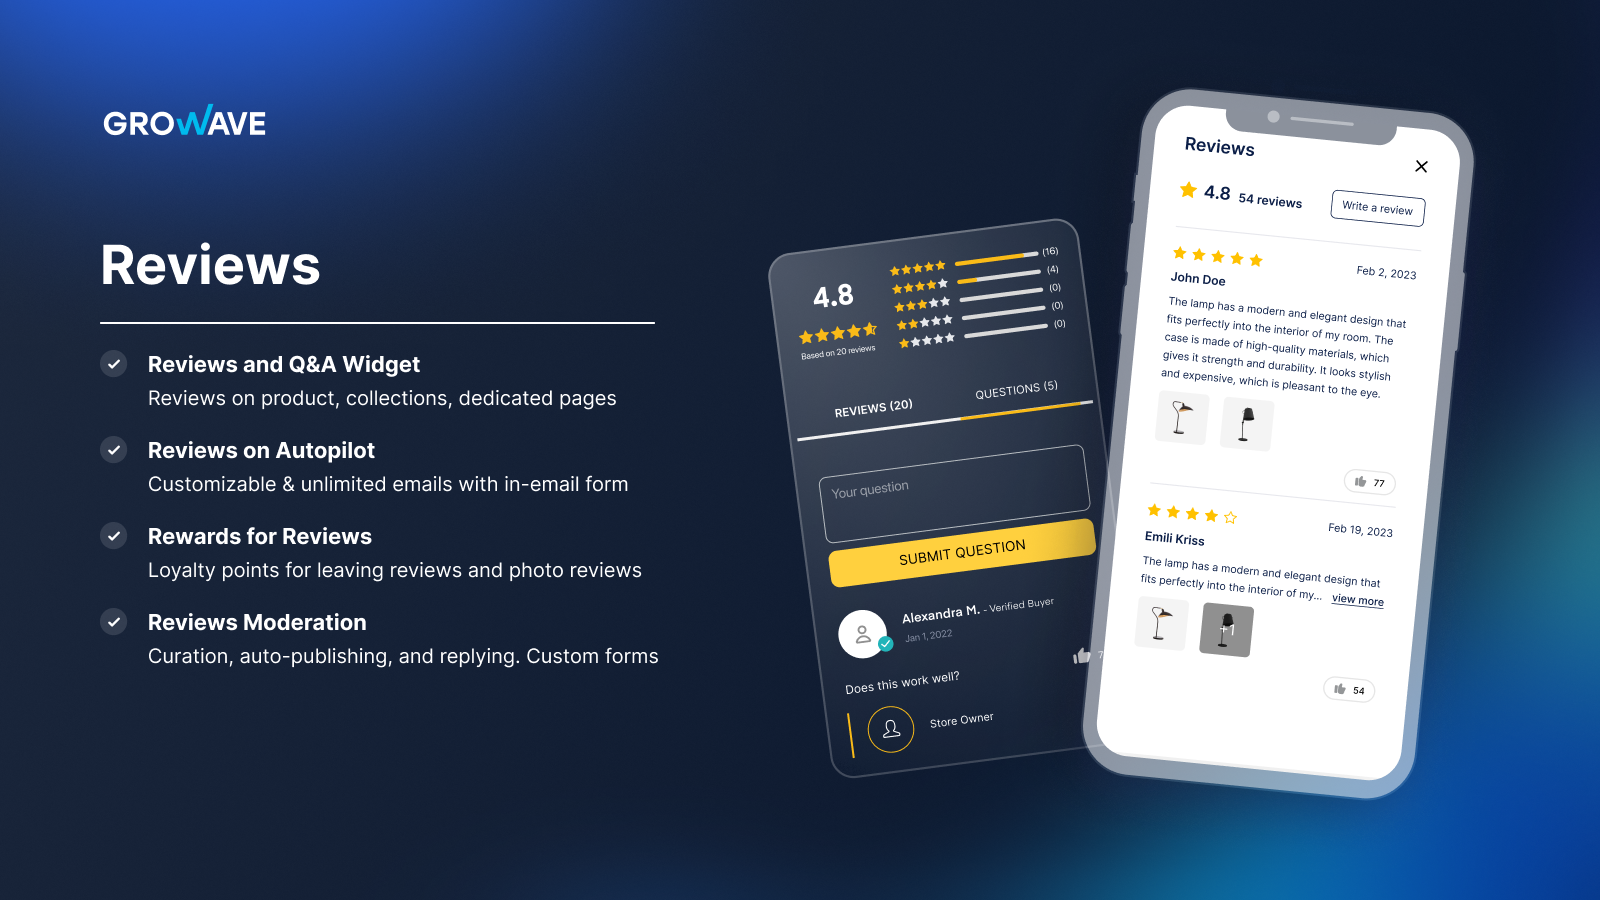 Growave's Shopify product reviews app and Q&A